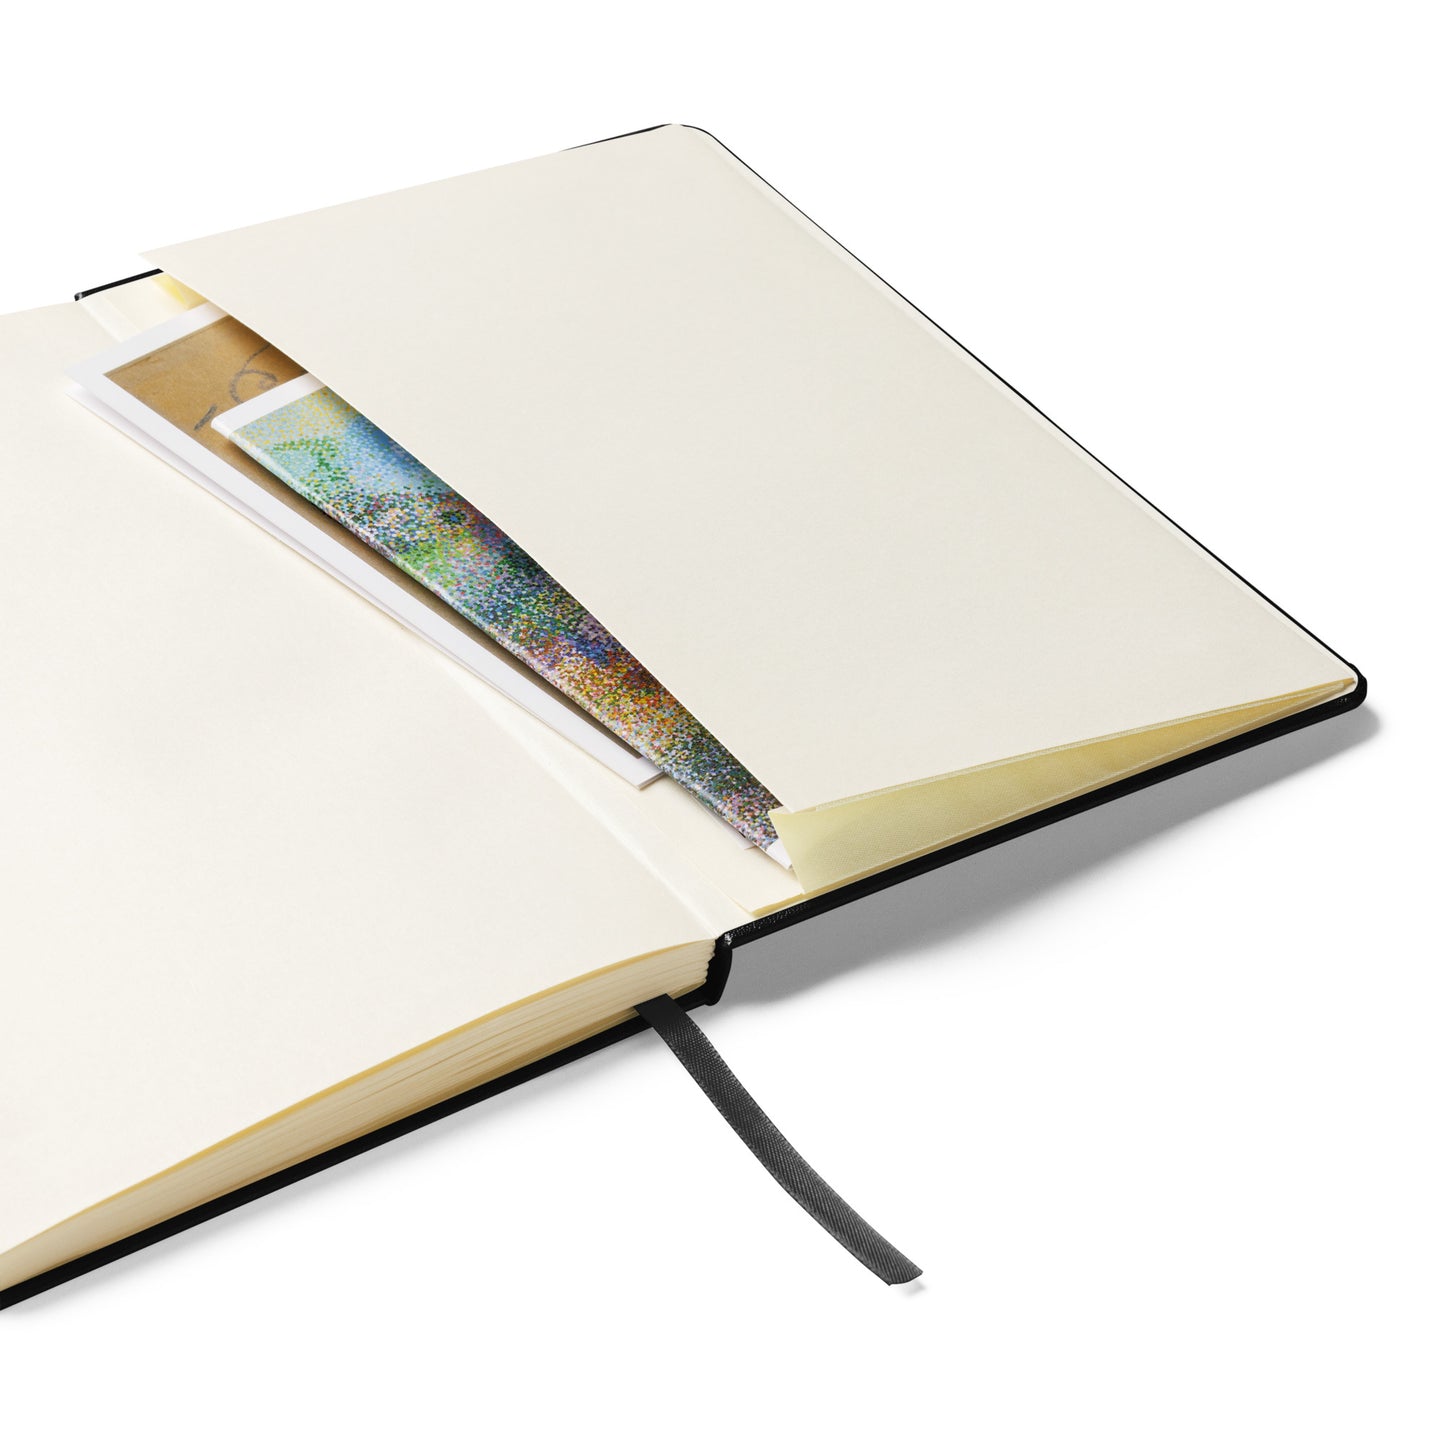 Rainbow in the Sky Hardcover Notebook